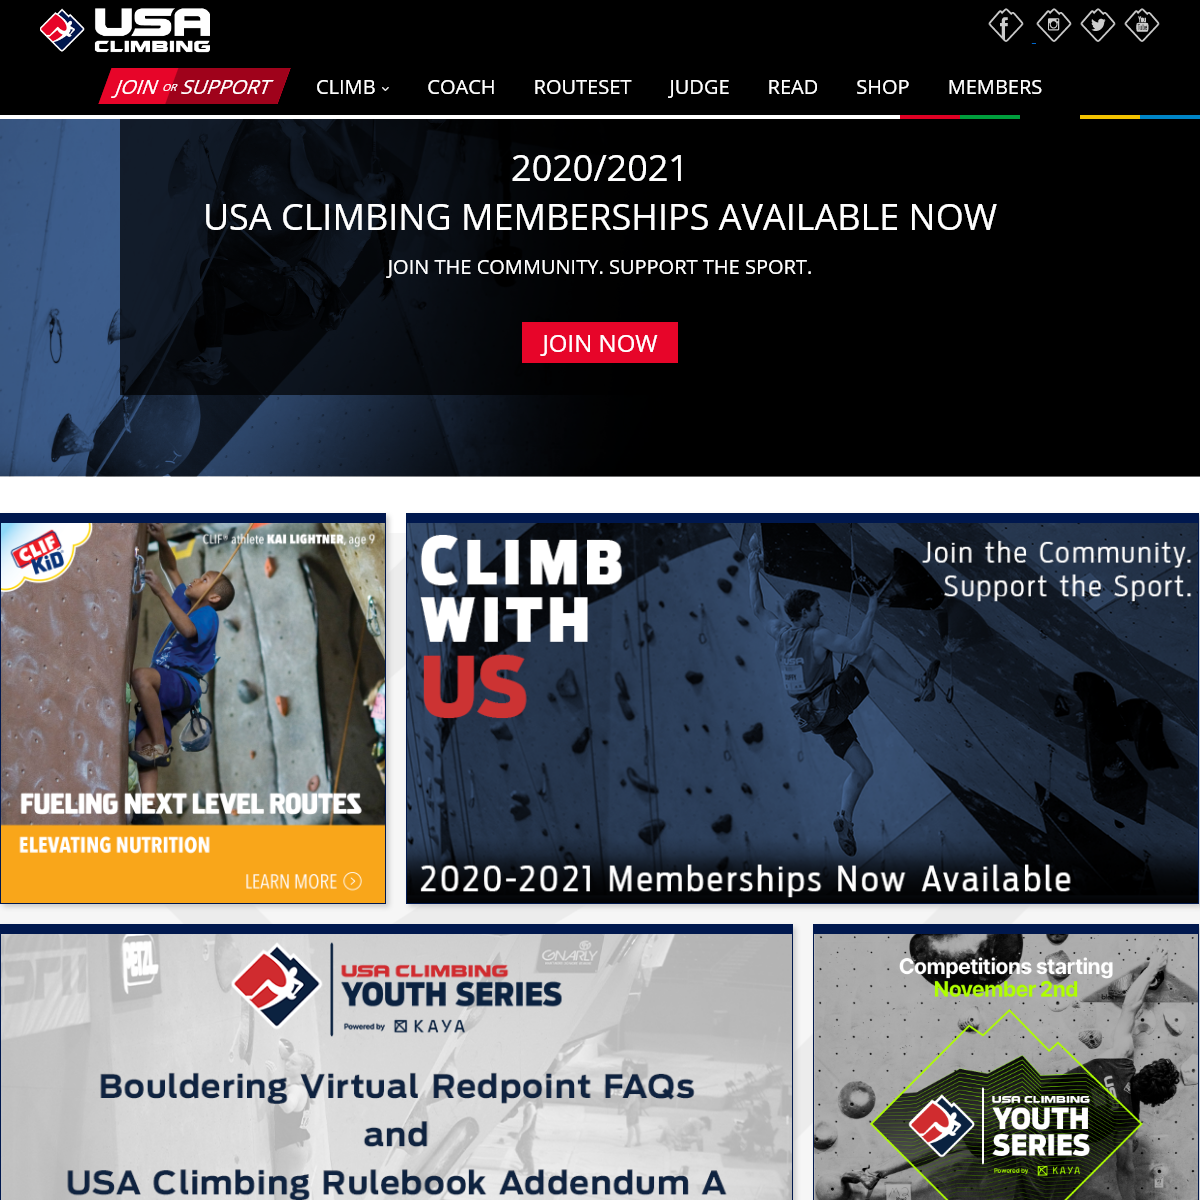 A complete backup of usaclimbing.org